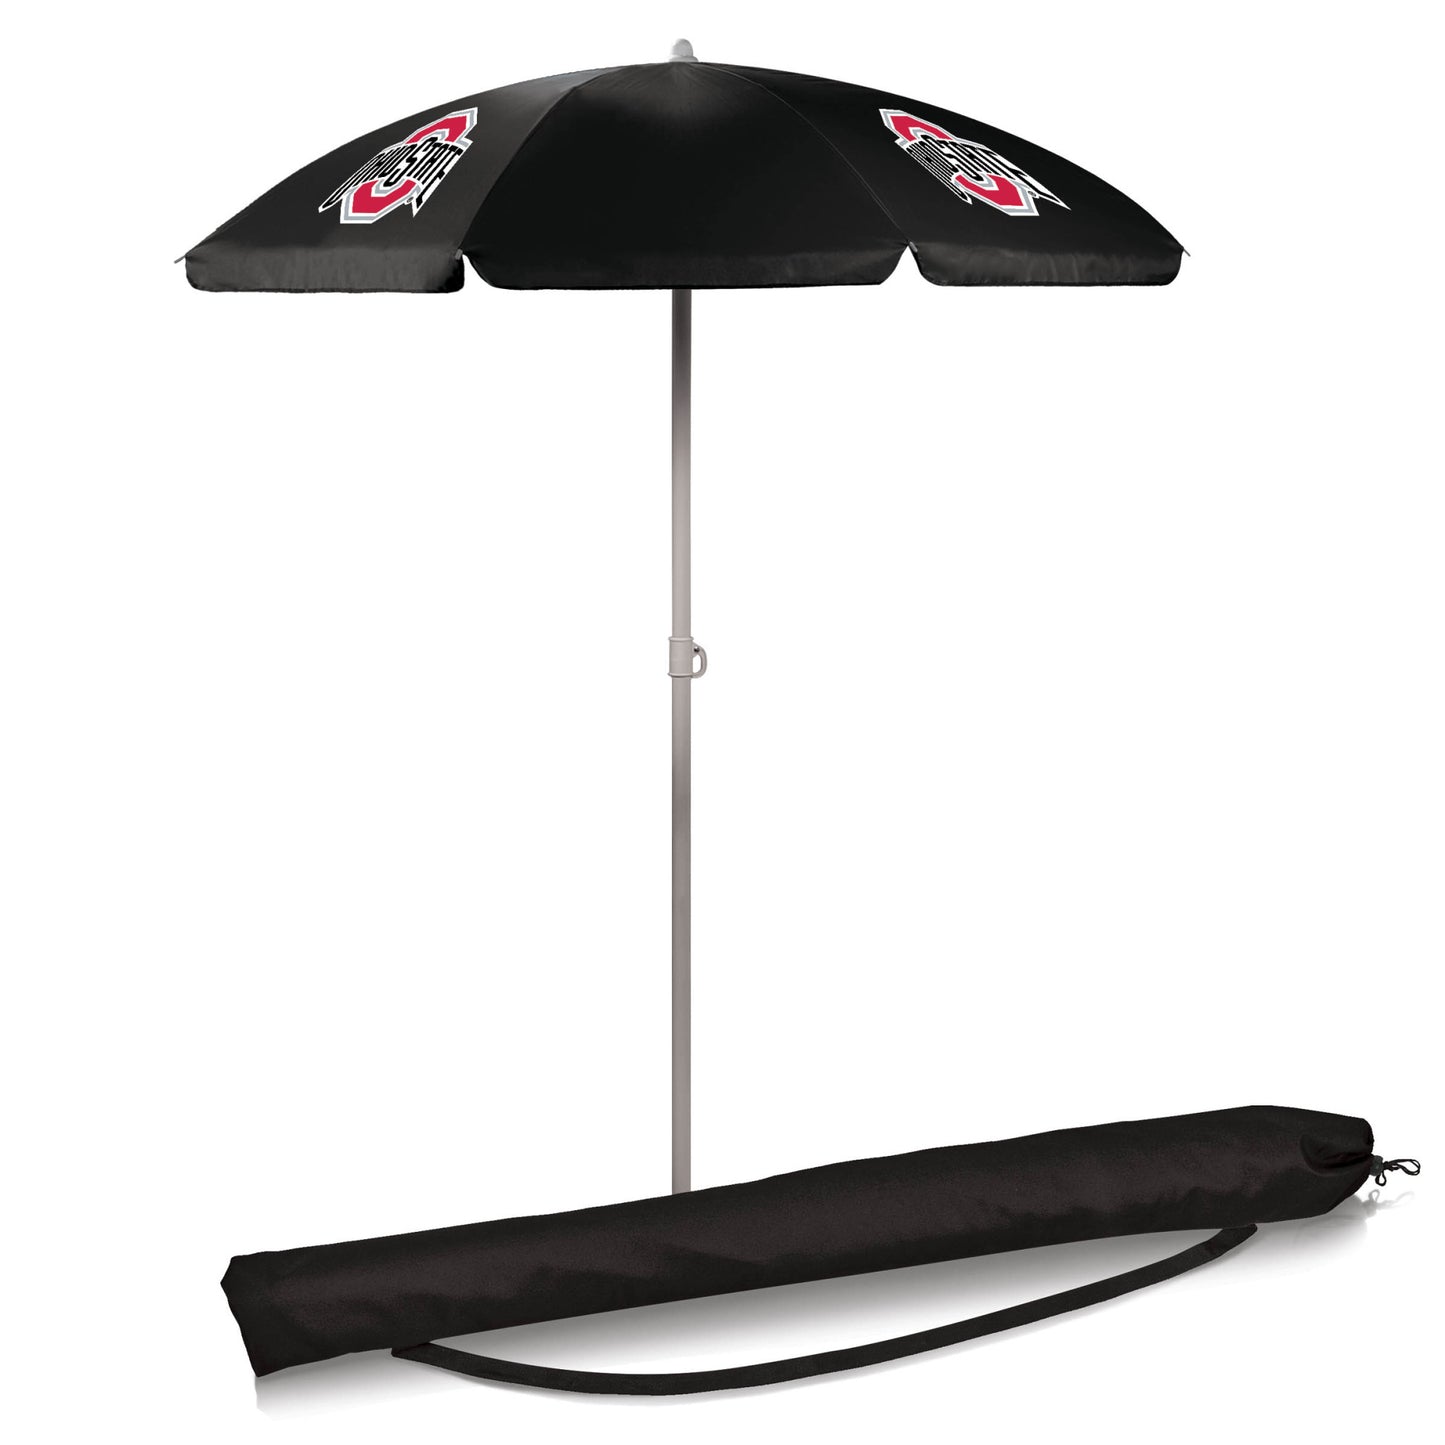 Ohio State Buckeyes 5.5' Portable Beach Umbrella by Picnic Time by Picnic Time